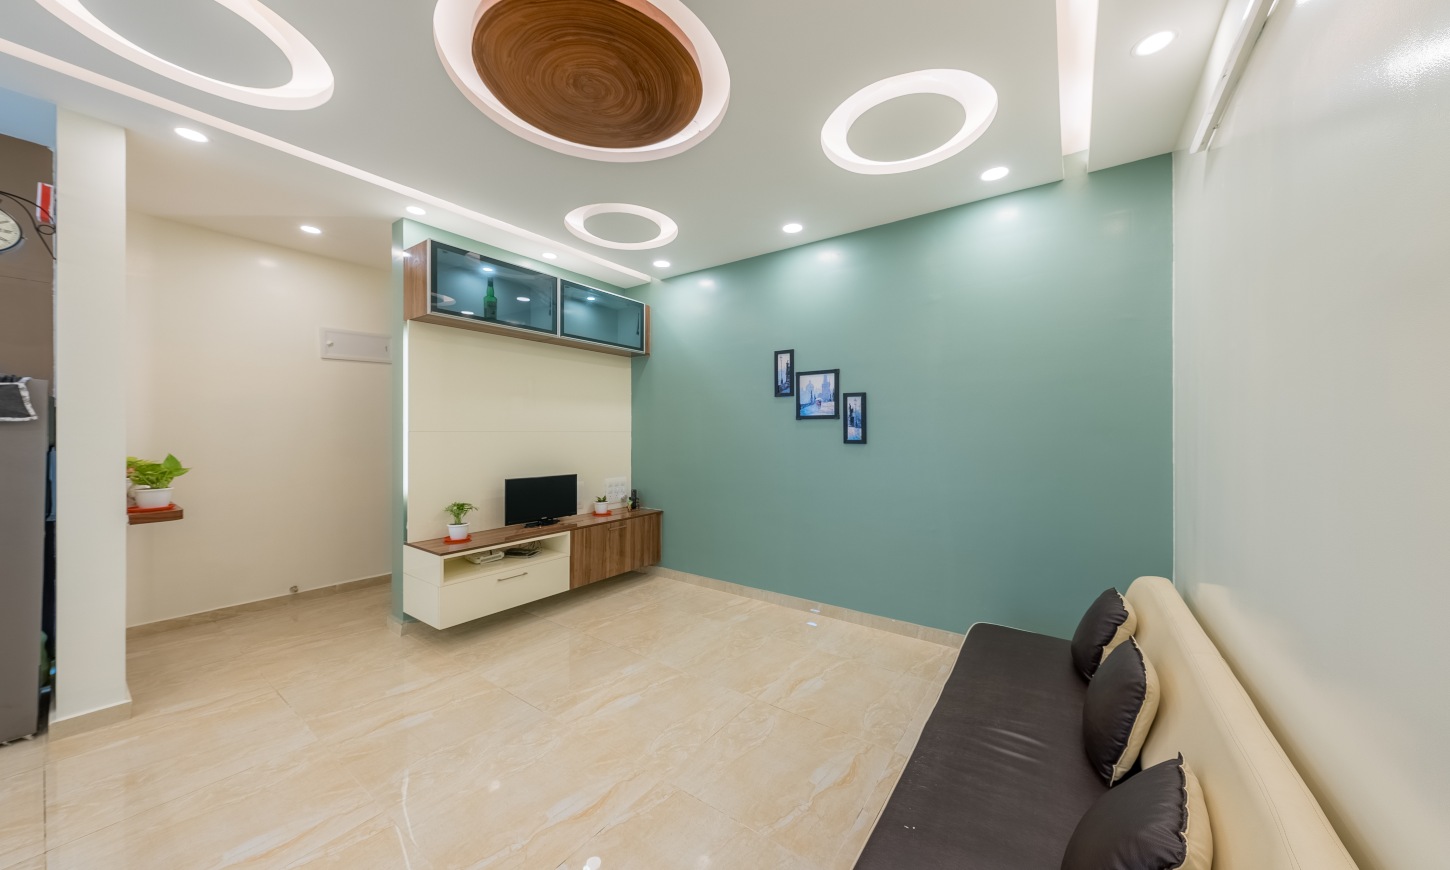 A living room designed for a 2 BHK apartment in Sarjapur Road with a TV unit and glass cabinet